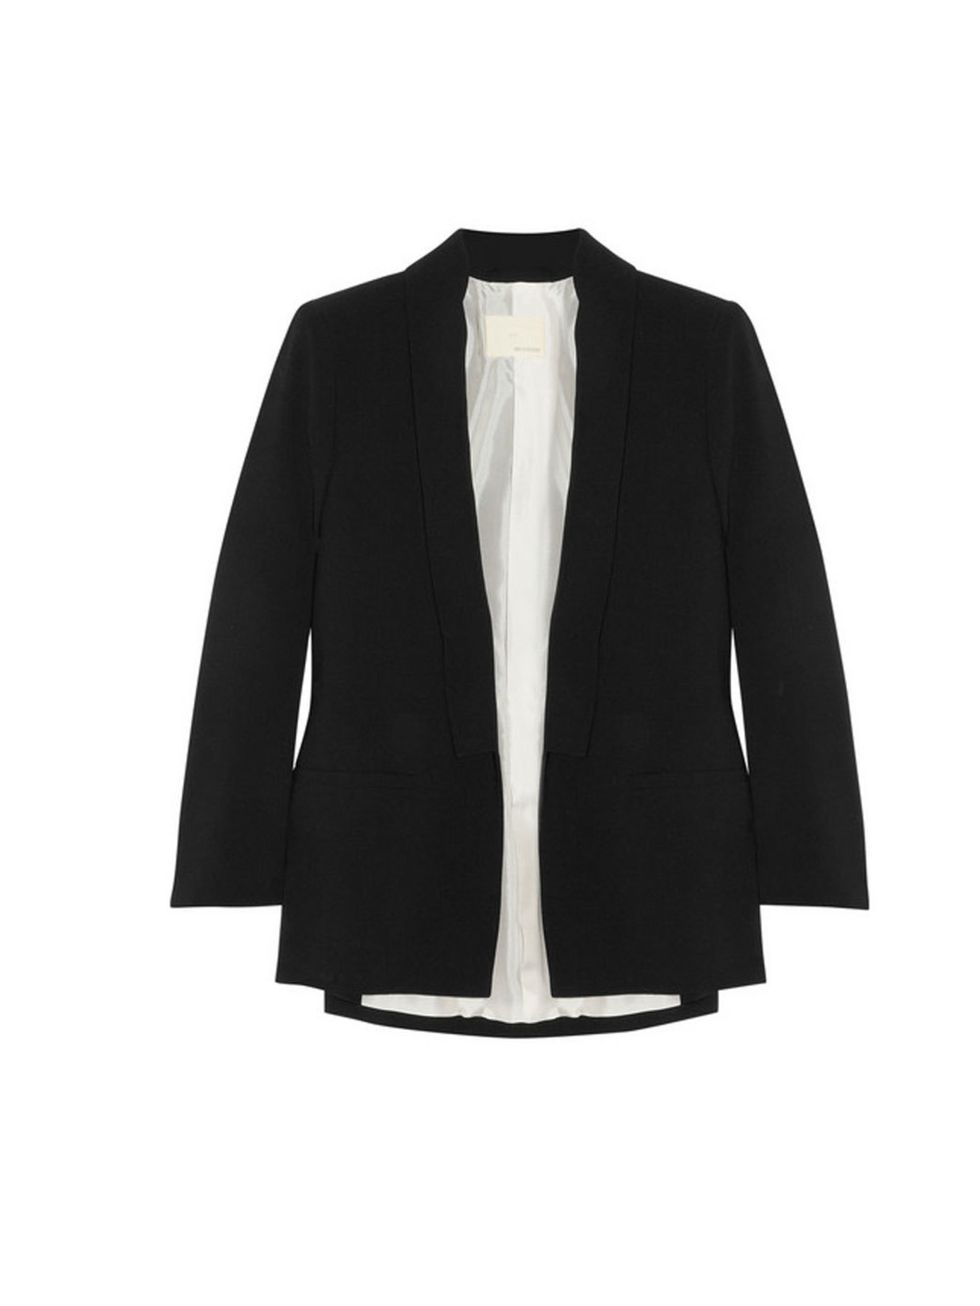 <p>Girl by Band of Outsiders blazer, £440, at Net-a-Porter</p><p><a href="http://shopping.elleuk.com/browse?fts=girl+by+band+of+outsiders+crepe+blazer">BUY NOW</a></p>